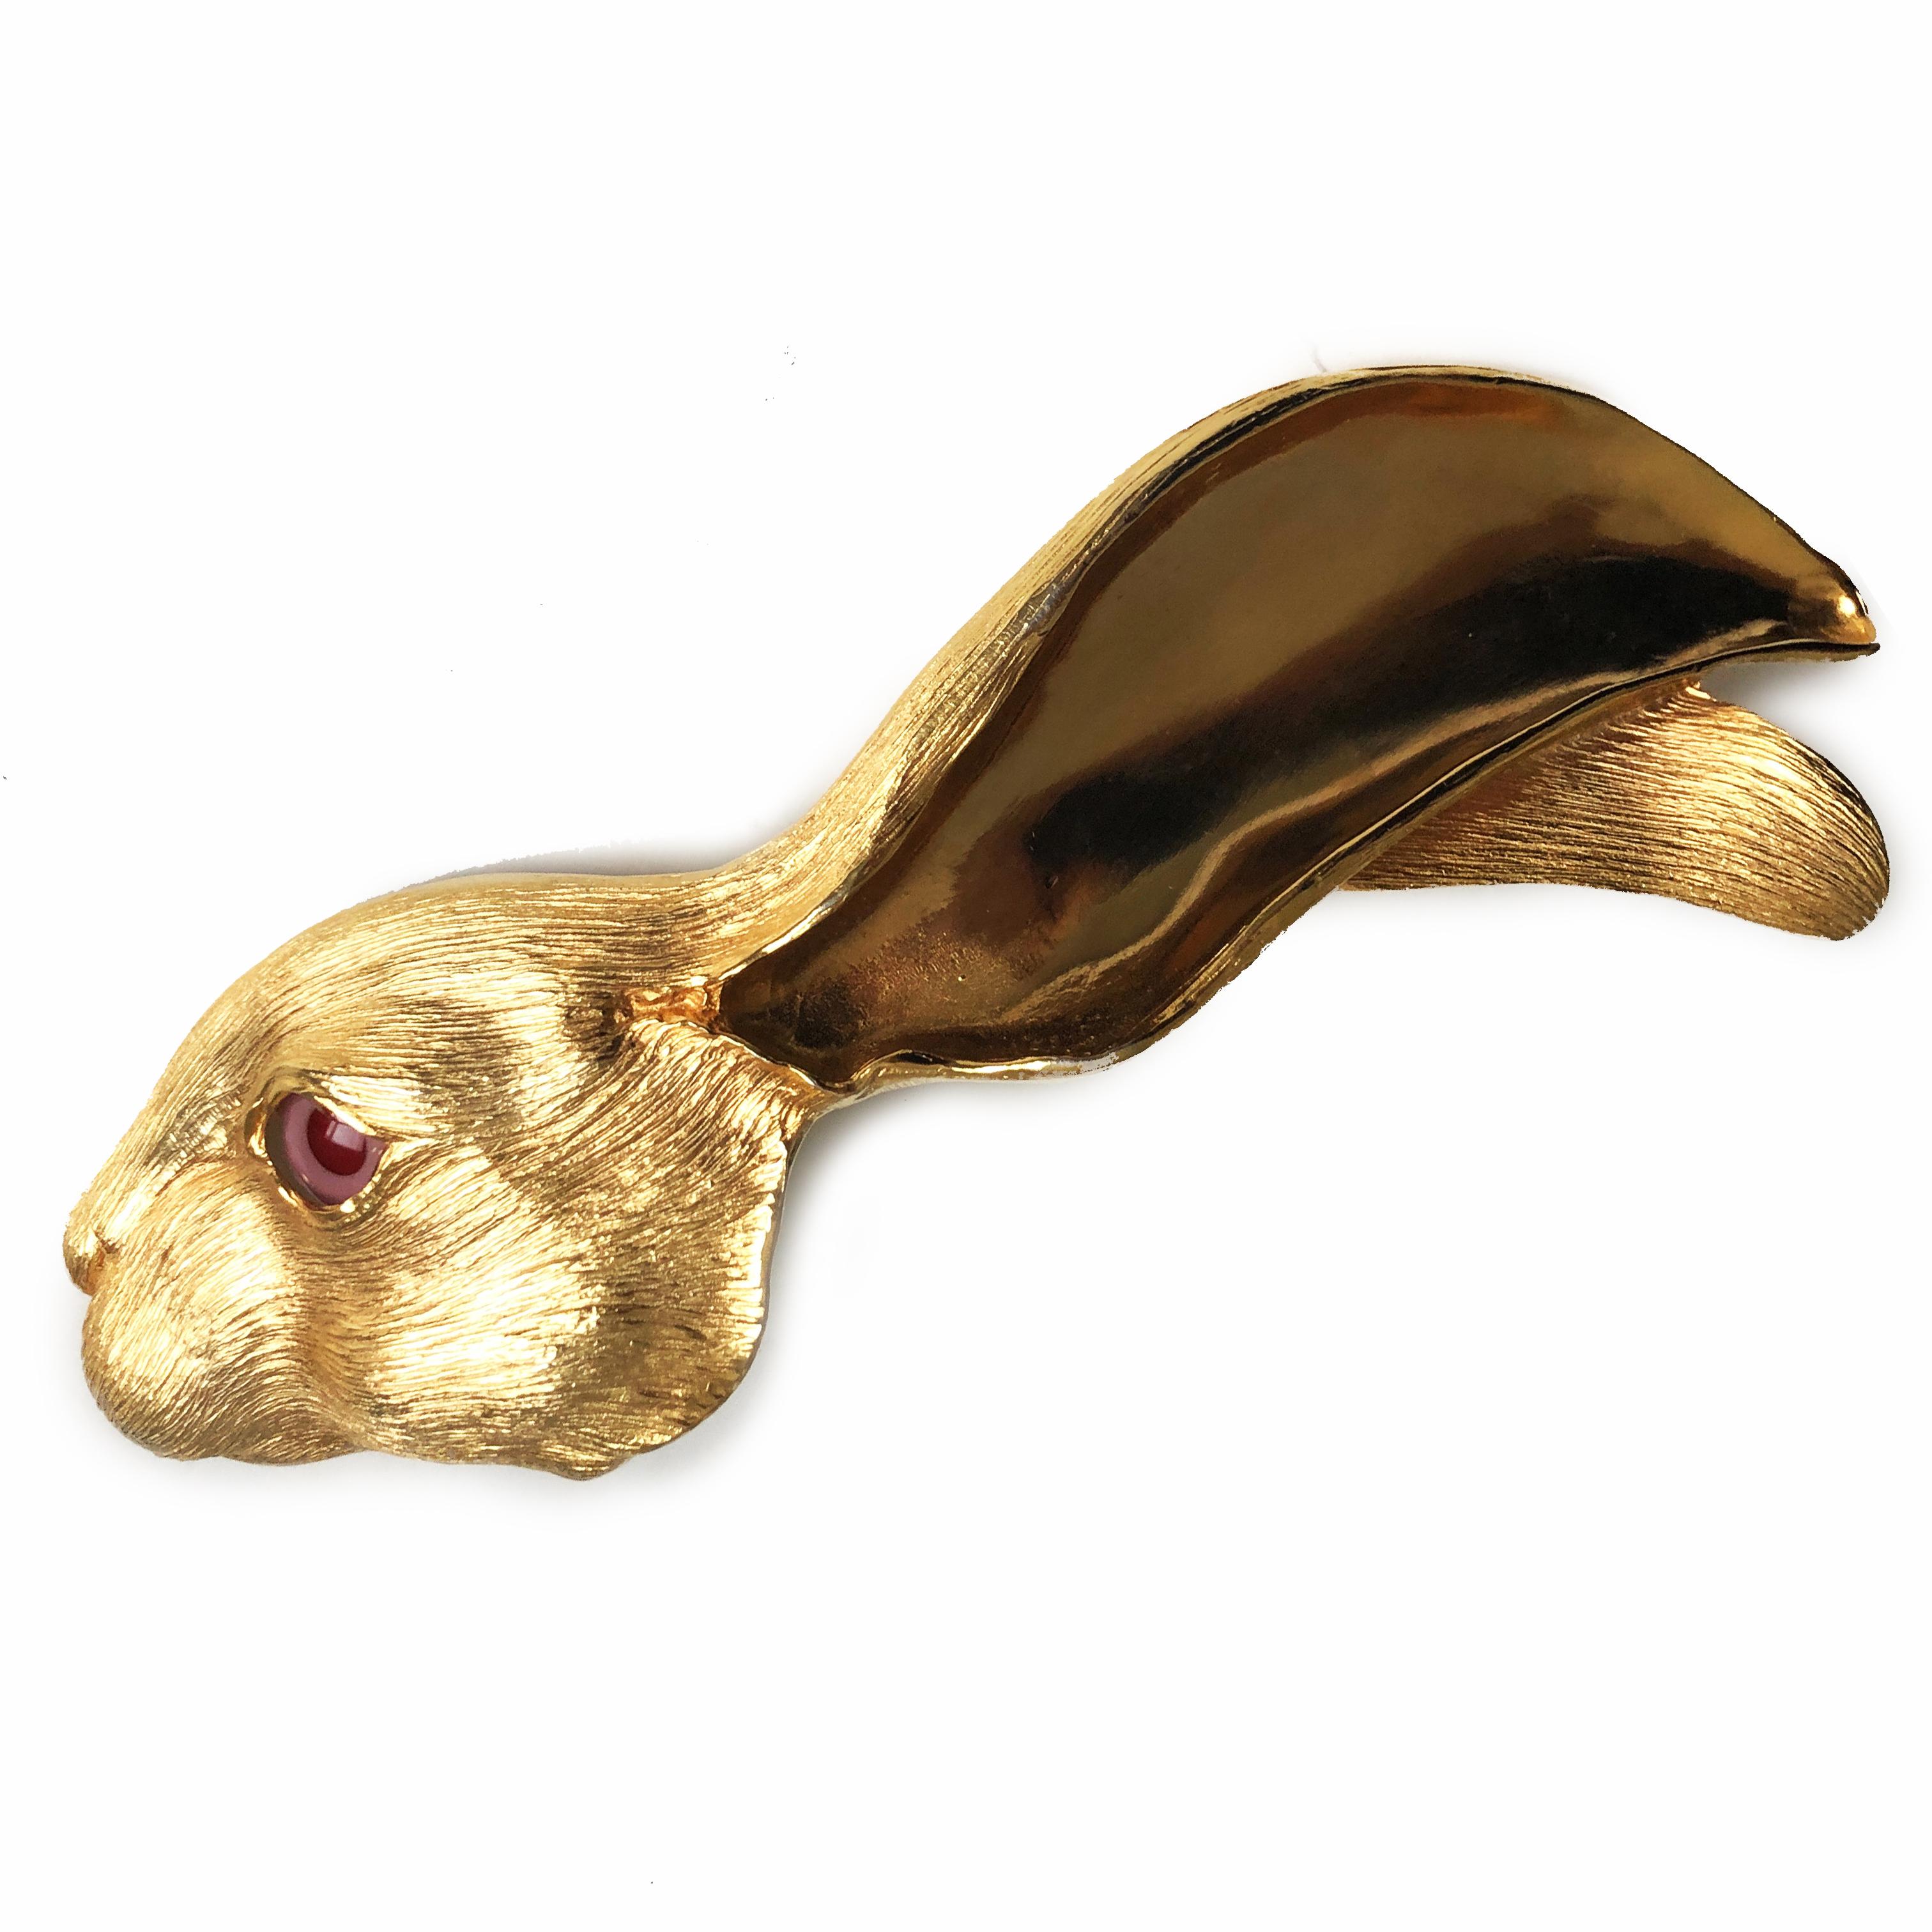 Christopher Ross massive 24kt gold plate rabbit belt buckle. Perfect for the animal lover or for anyone who enjoys a sculptural statement piece. Christopher Ross is a NY sculptor whose work has been shown at The Metropolitan Museum of Art in New